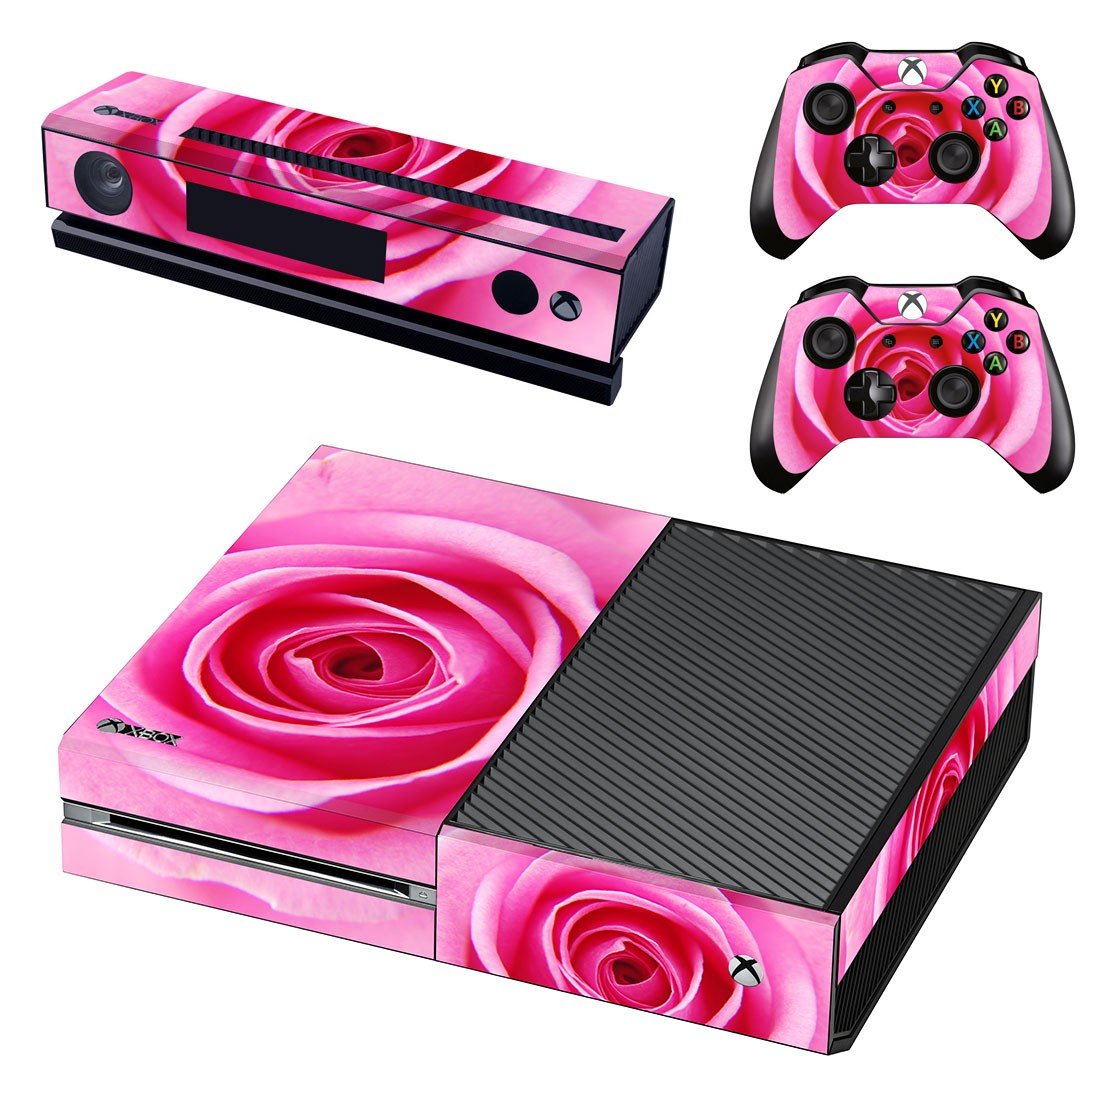 Rose Cover For Xbox One